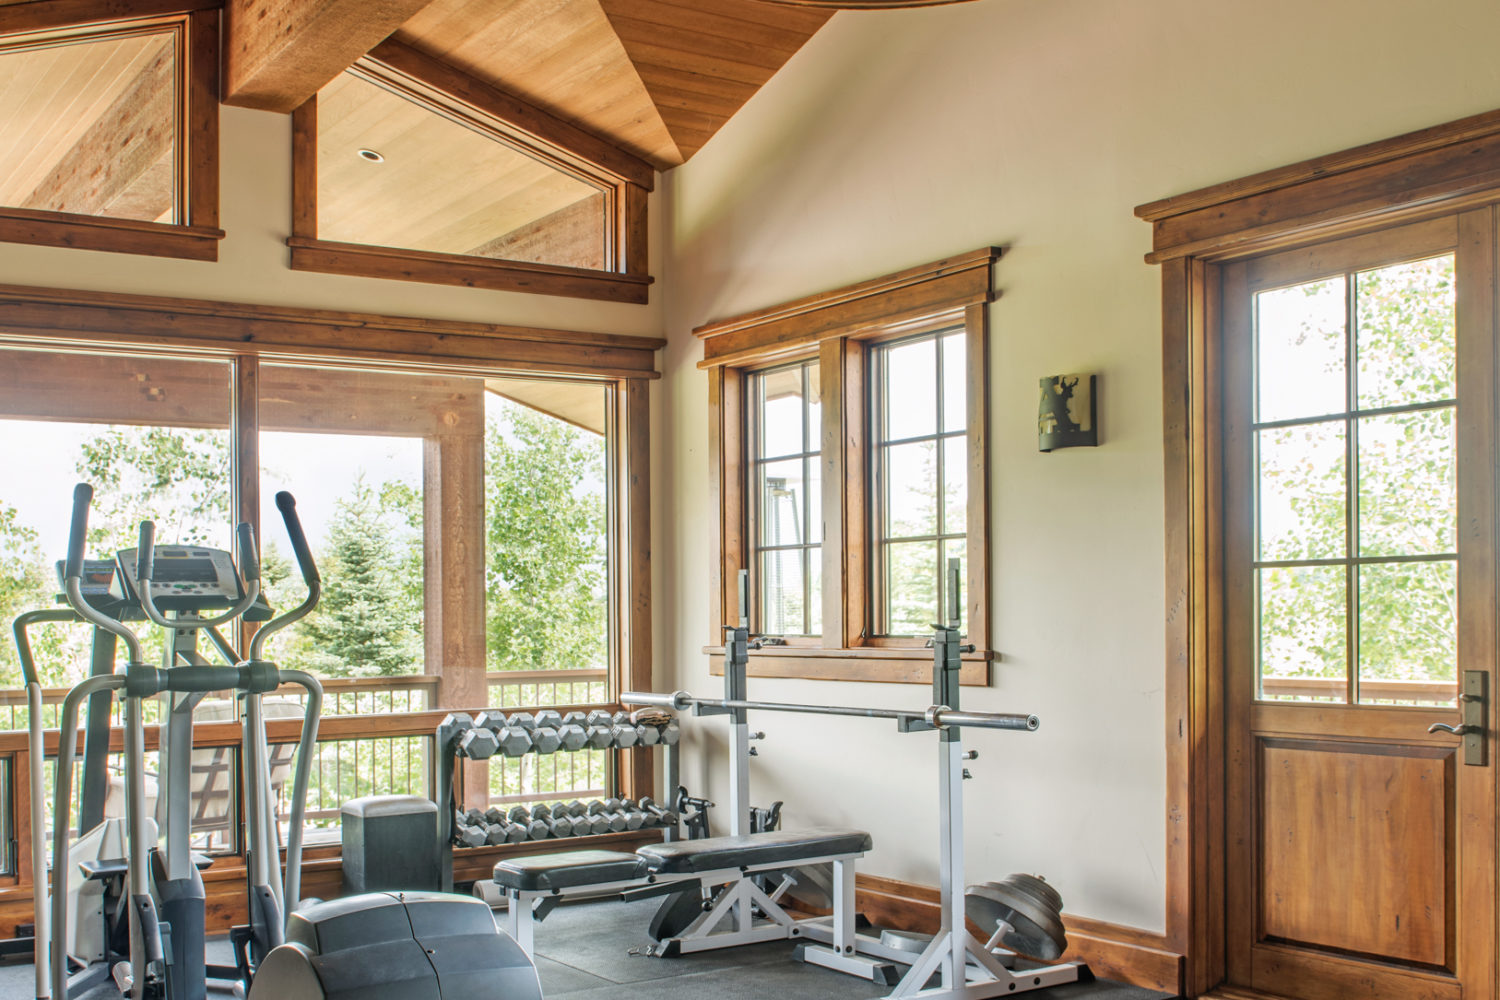 A large room with exercise equipment and windows viewing the outside